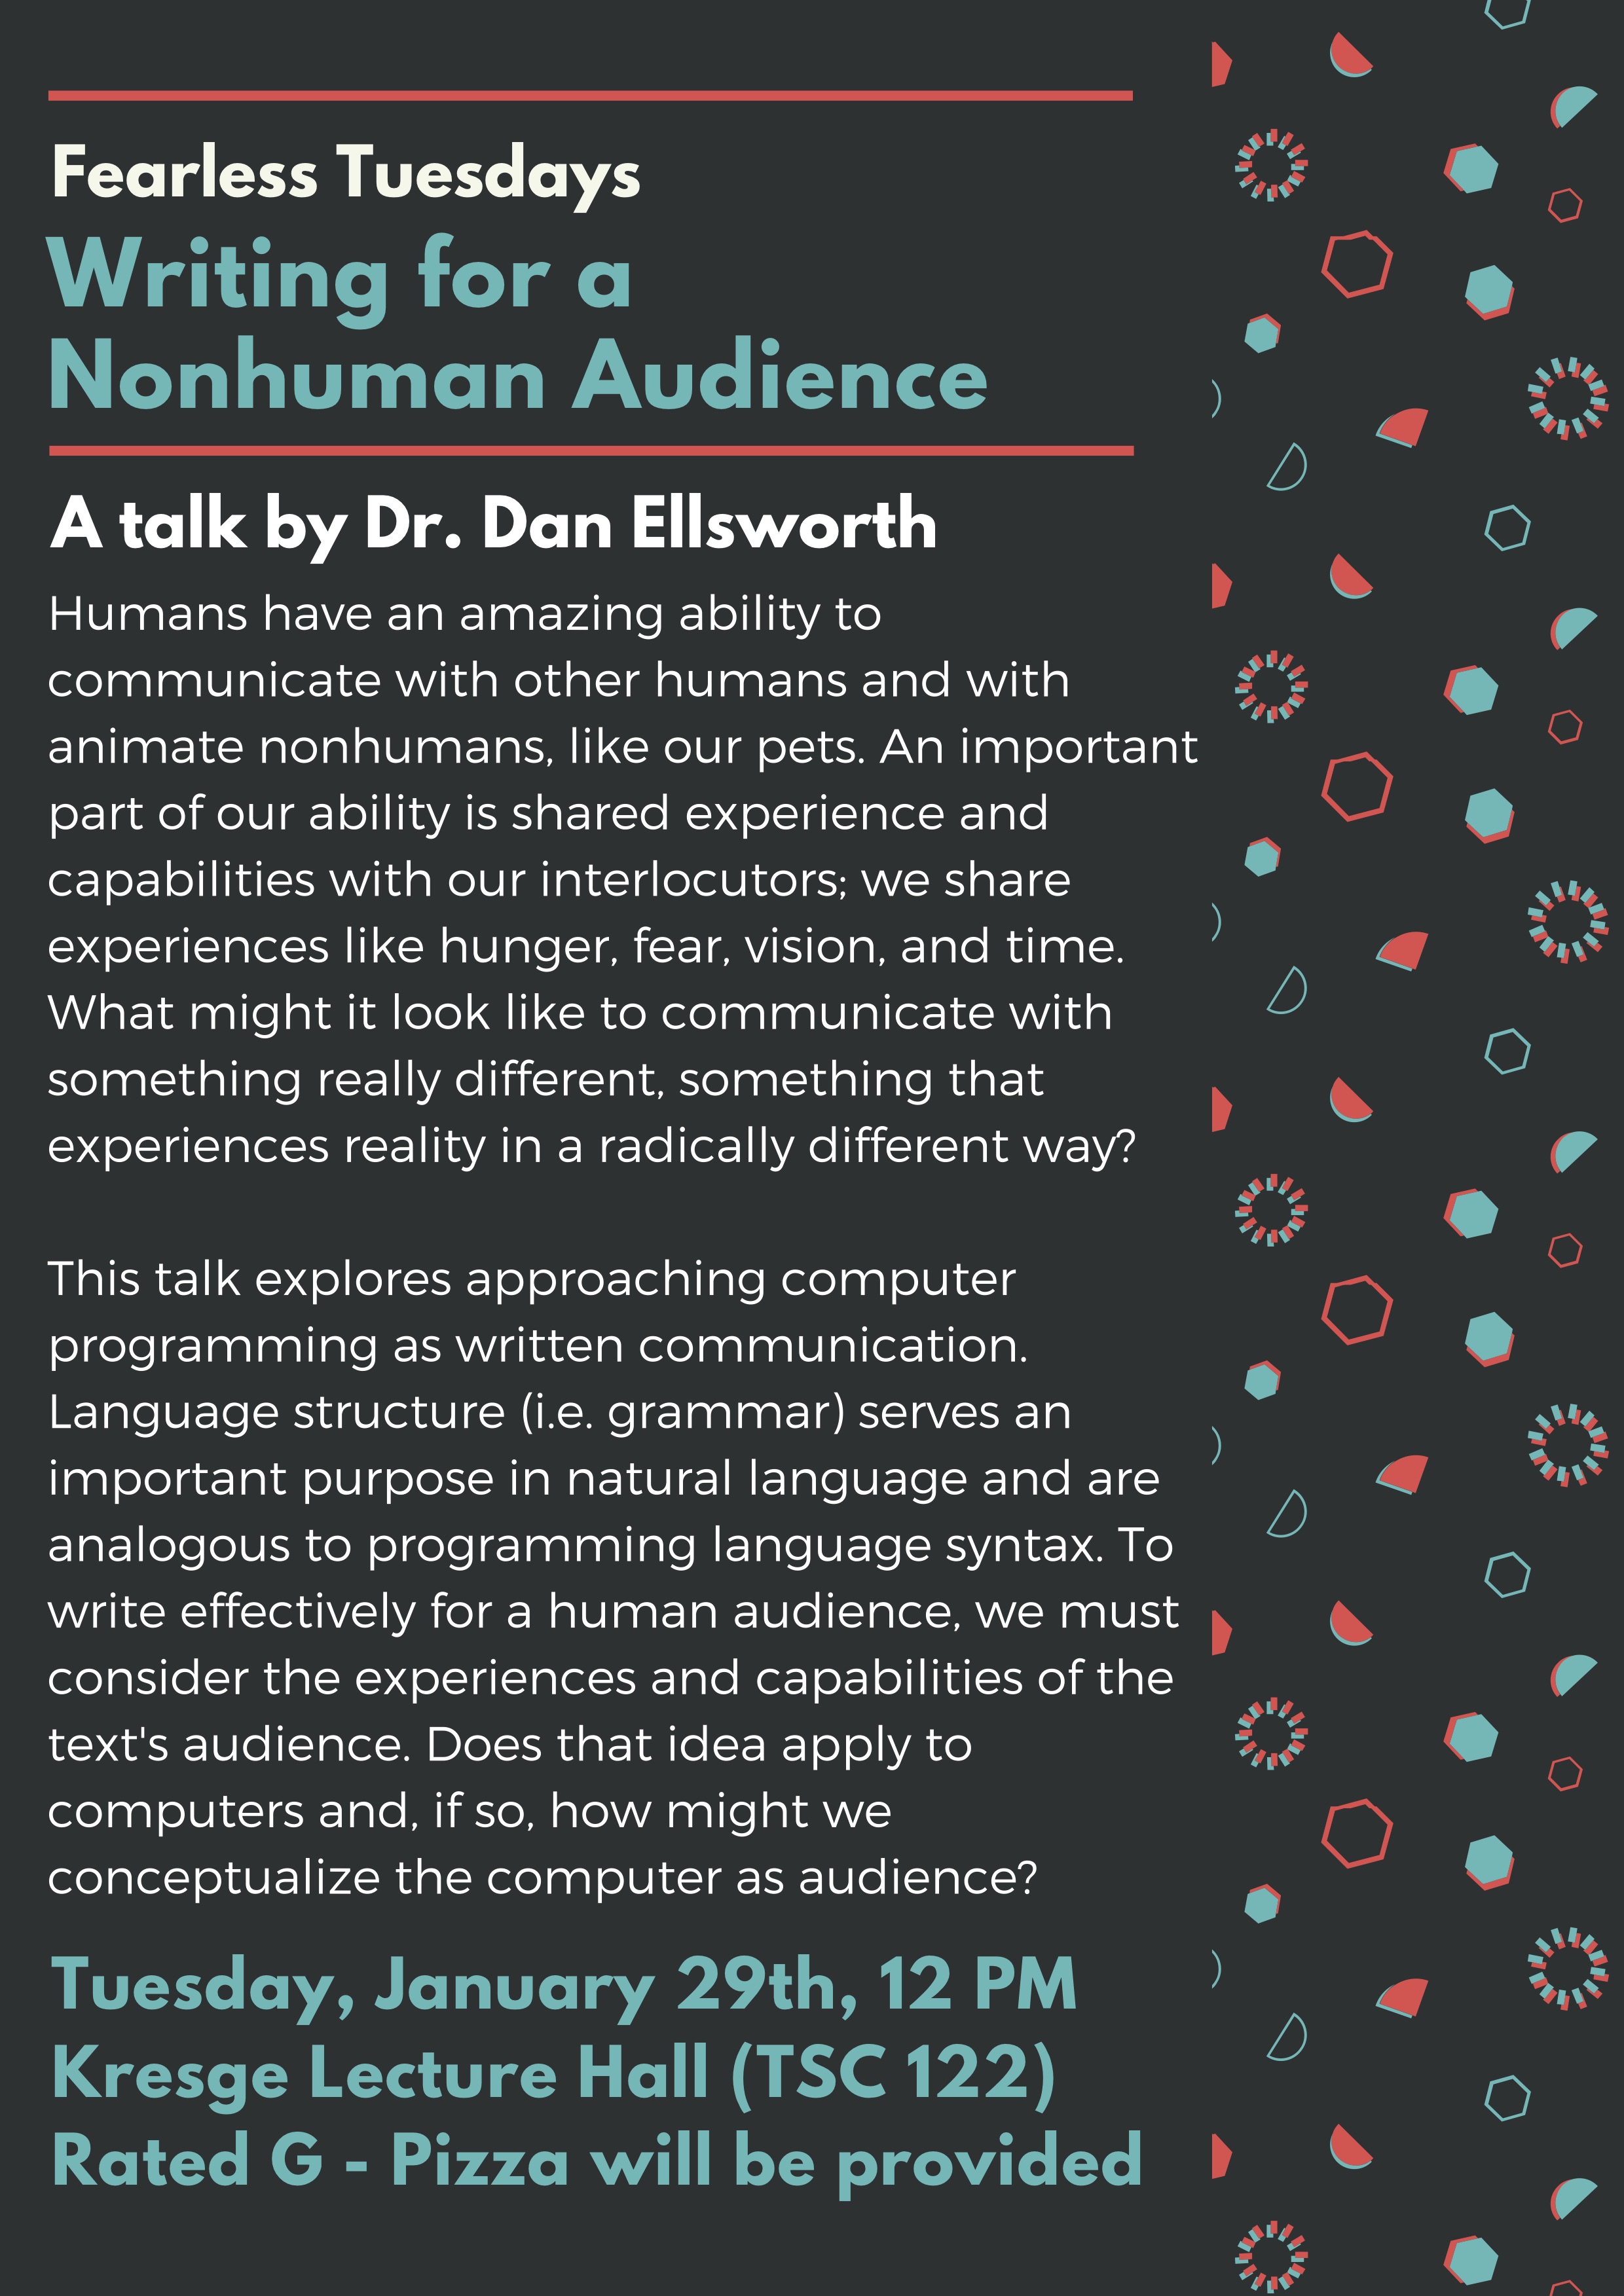 Jan 29 - Writing for a nonhuman audience